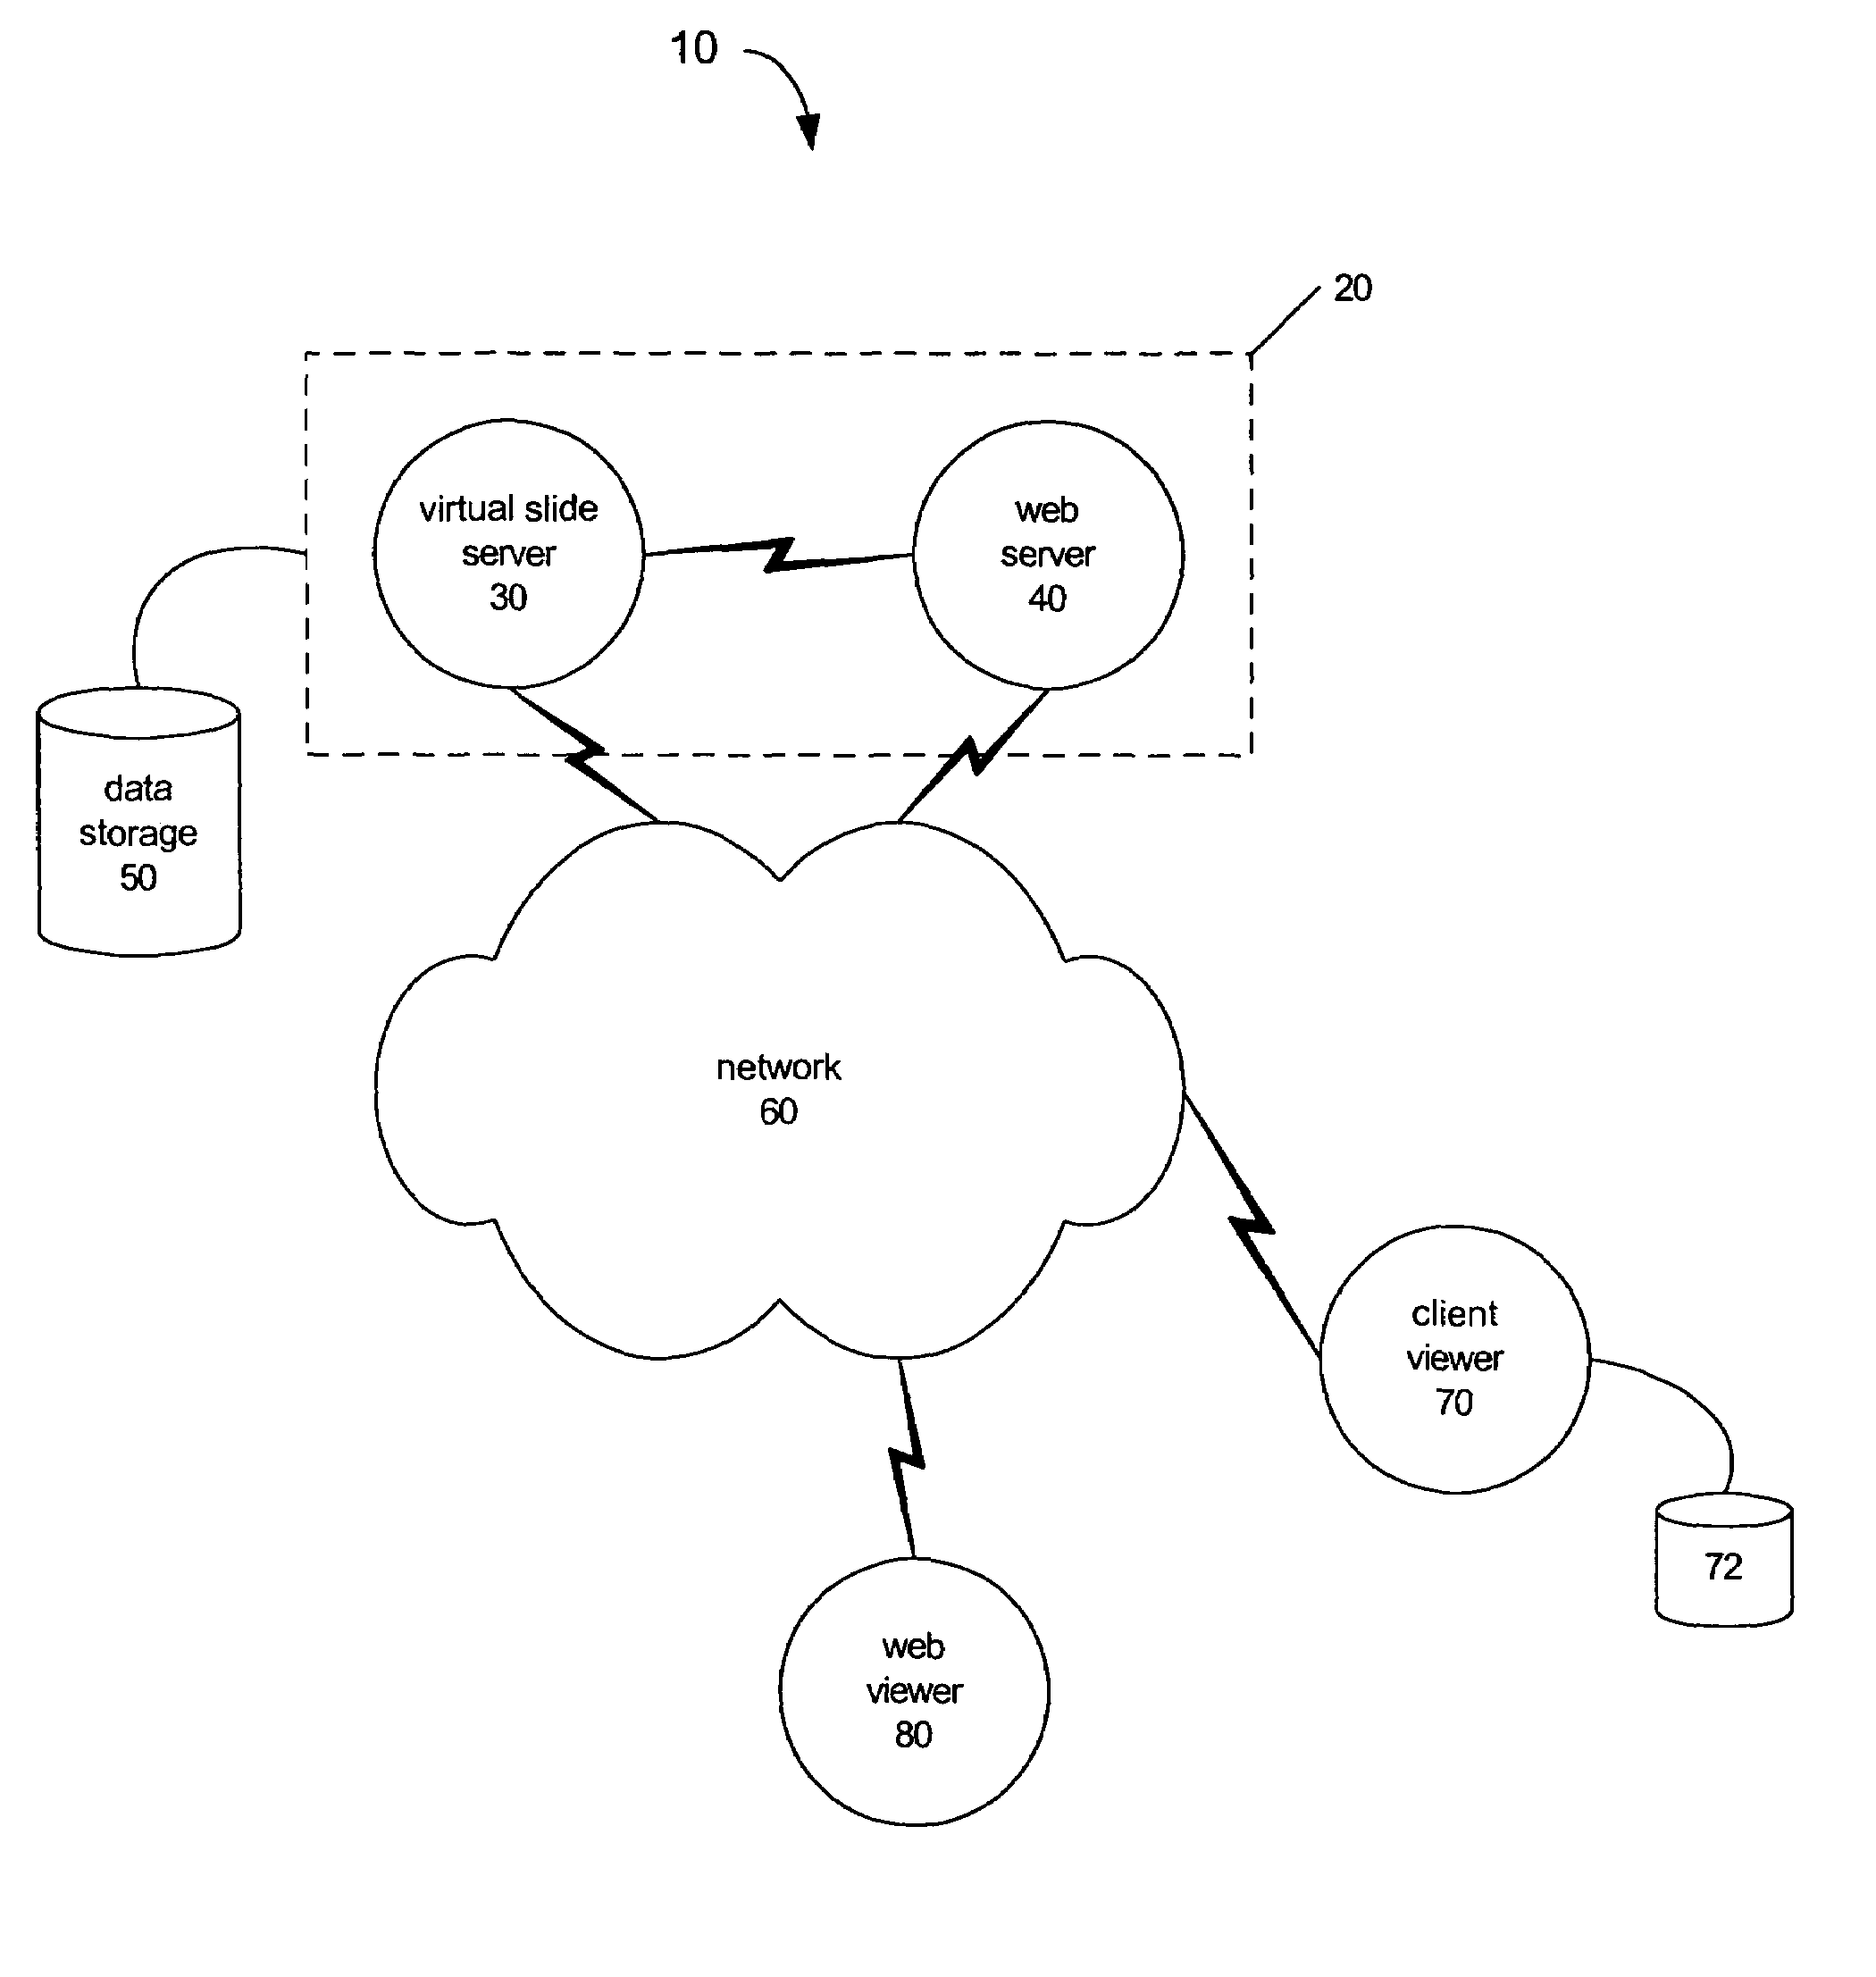 System and method for viewing virtual slides